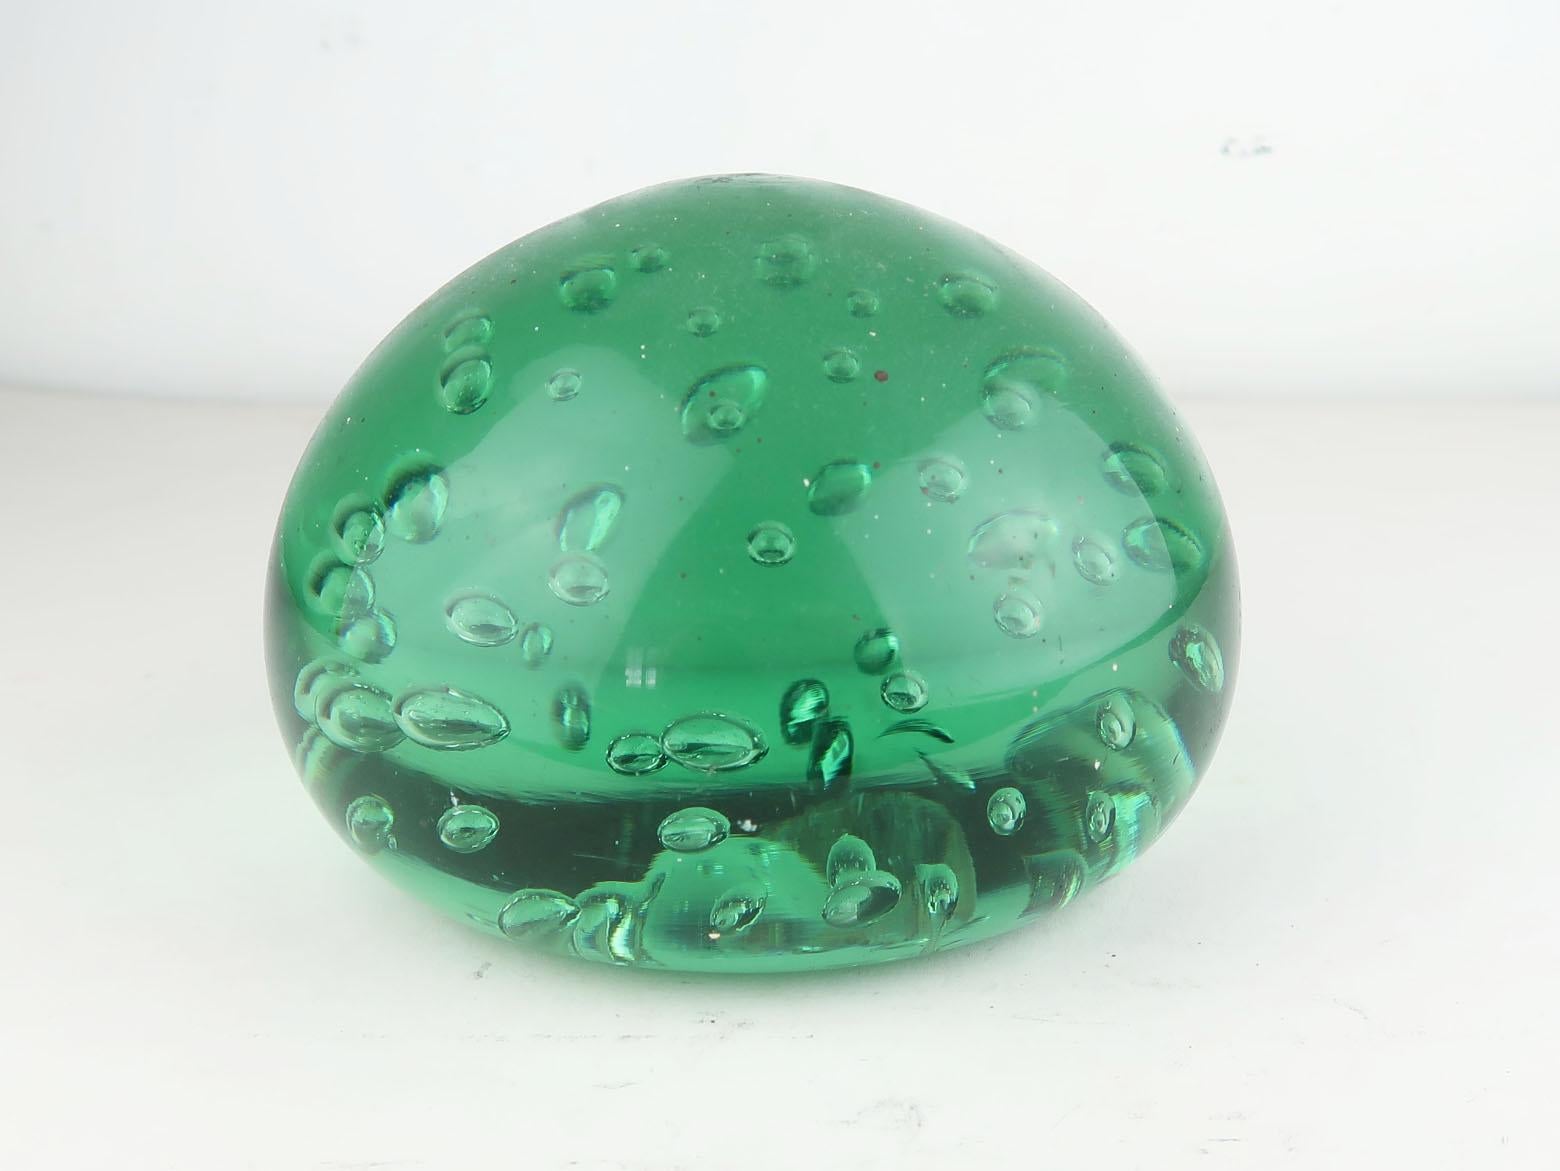 Hand-Crafted Large Antique Green Glass Doorstop, English, Late 19th Century